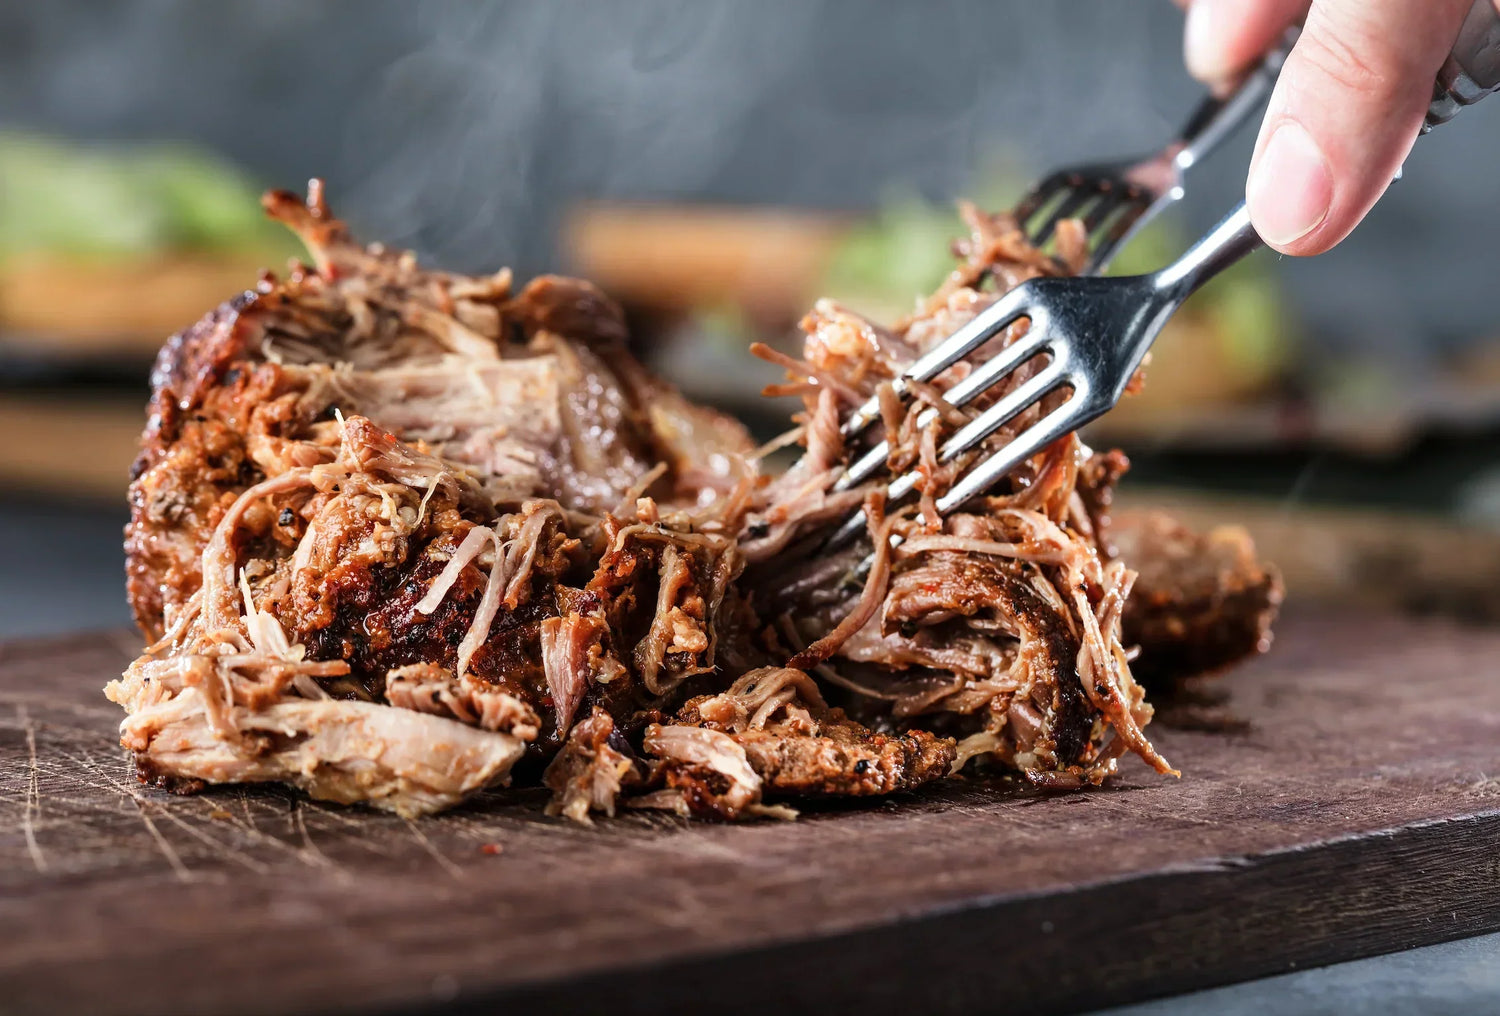 What is the Best Way to Keep Pulled Pork Moist?